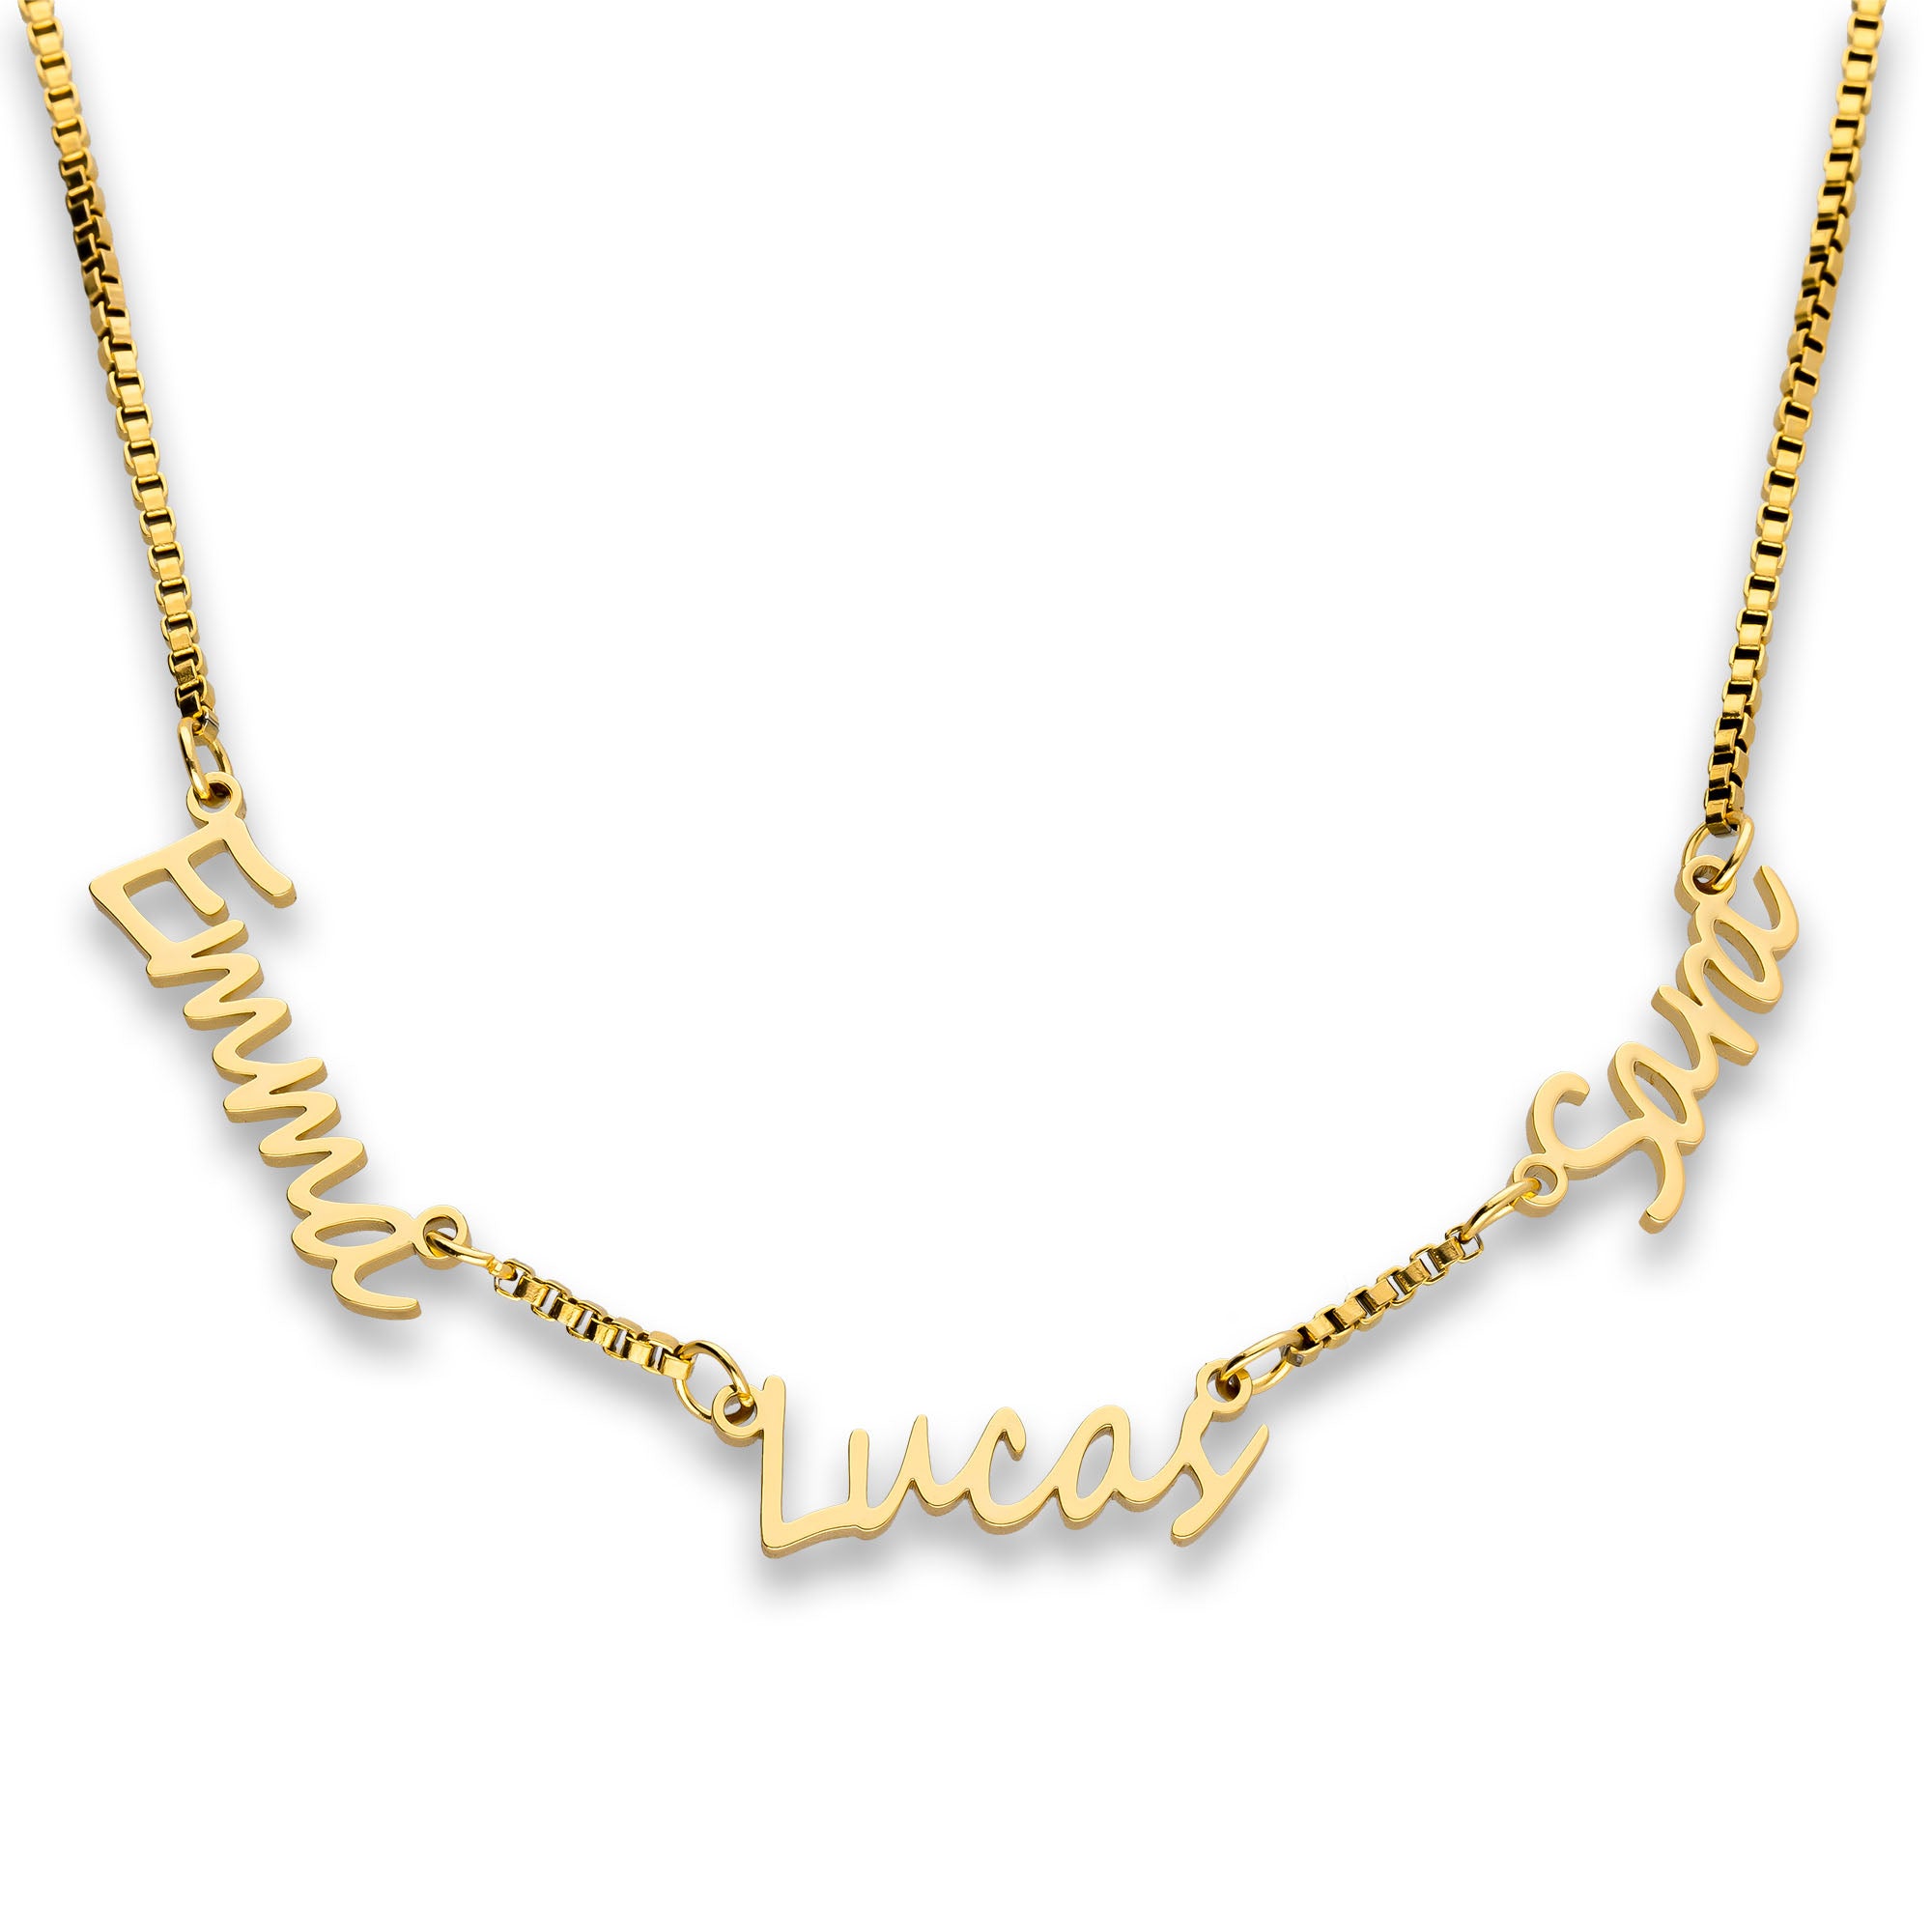 Multi name necklace gold